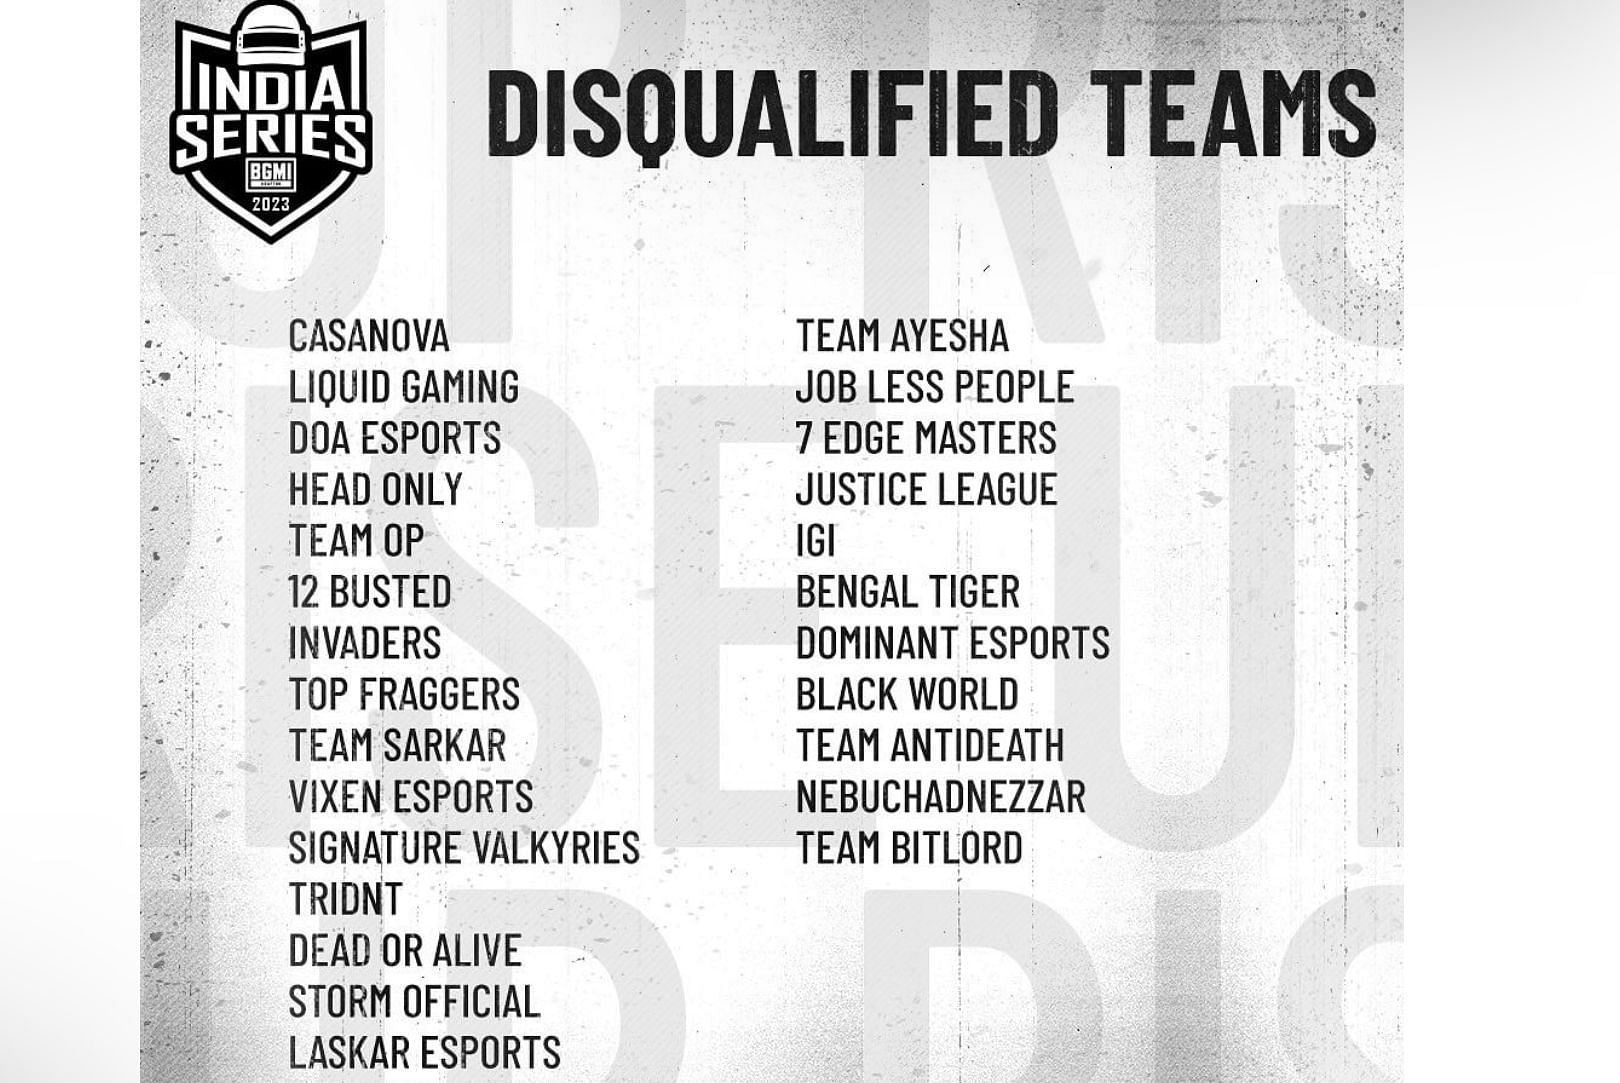 All these disqualified teams will not compete in any remaining stages (Image via Krafton)